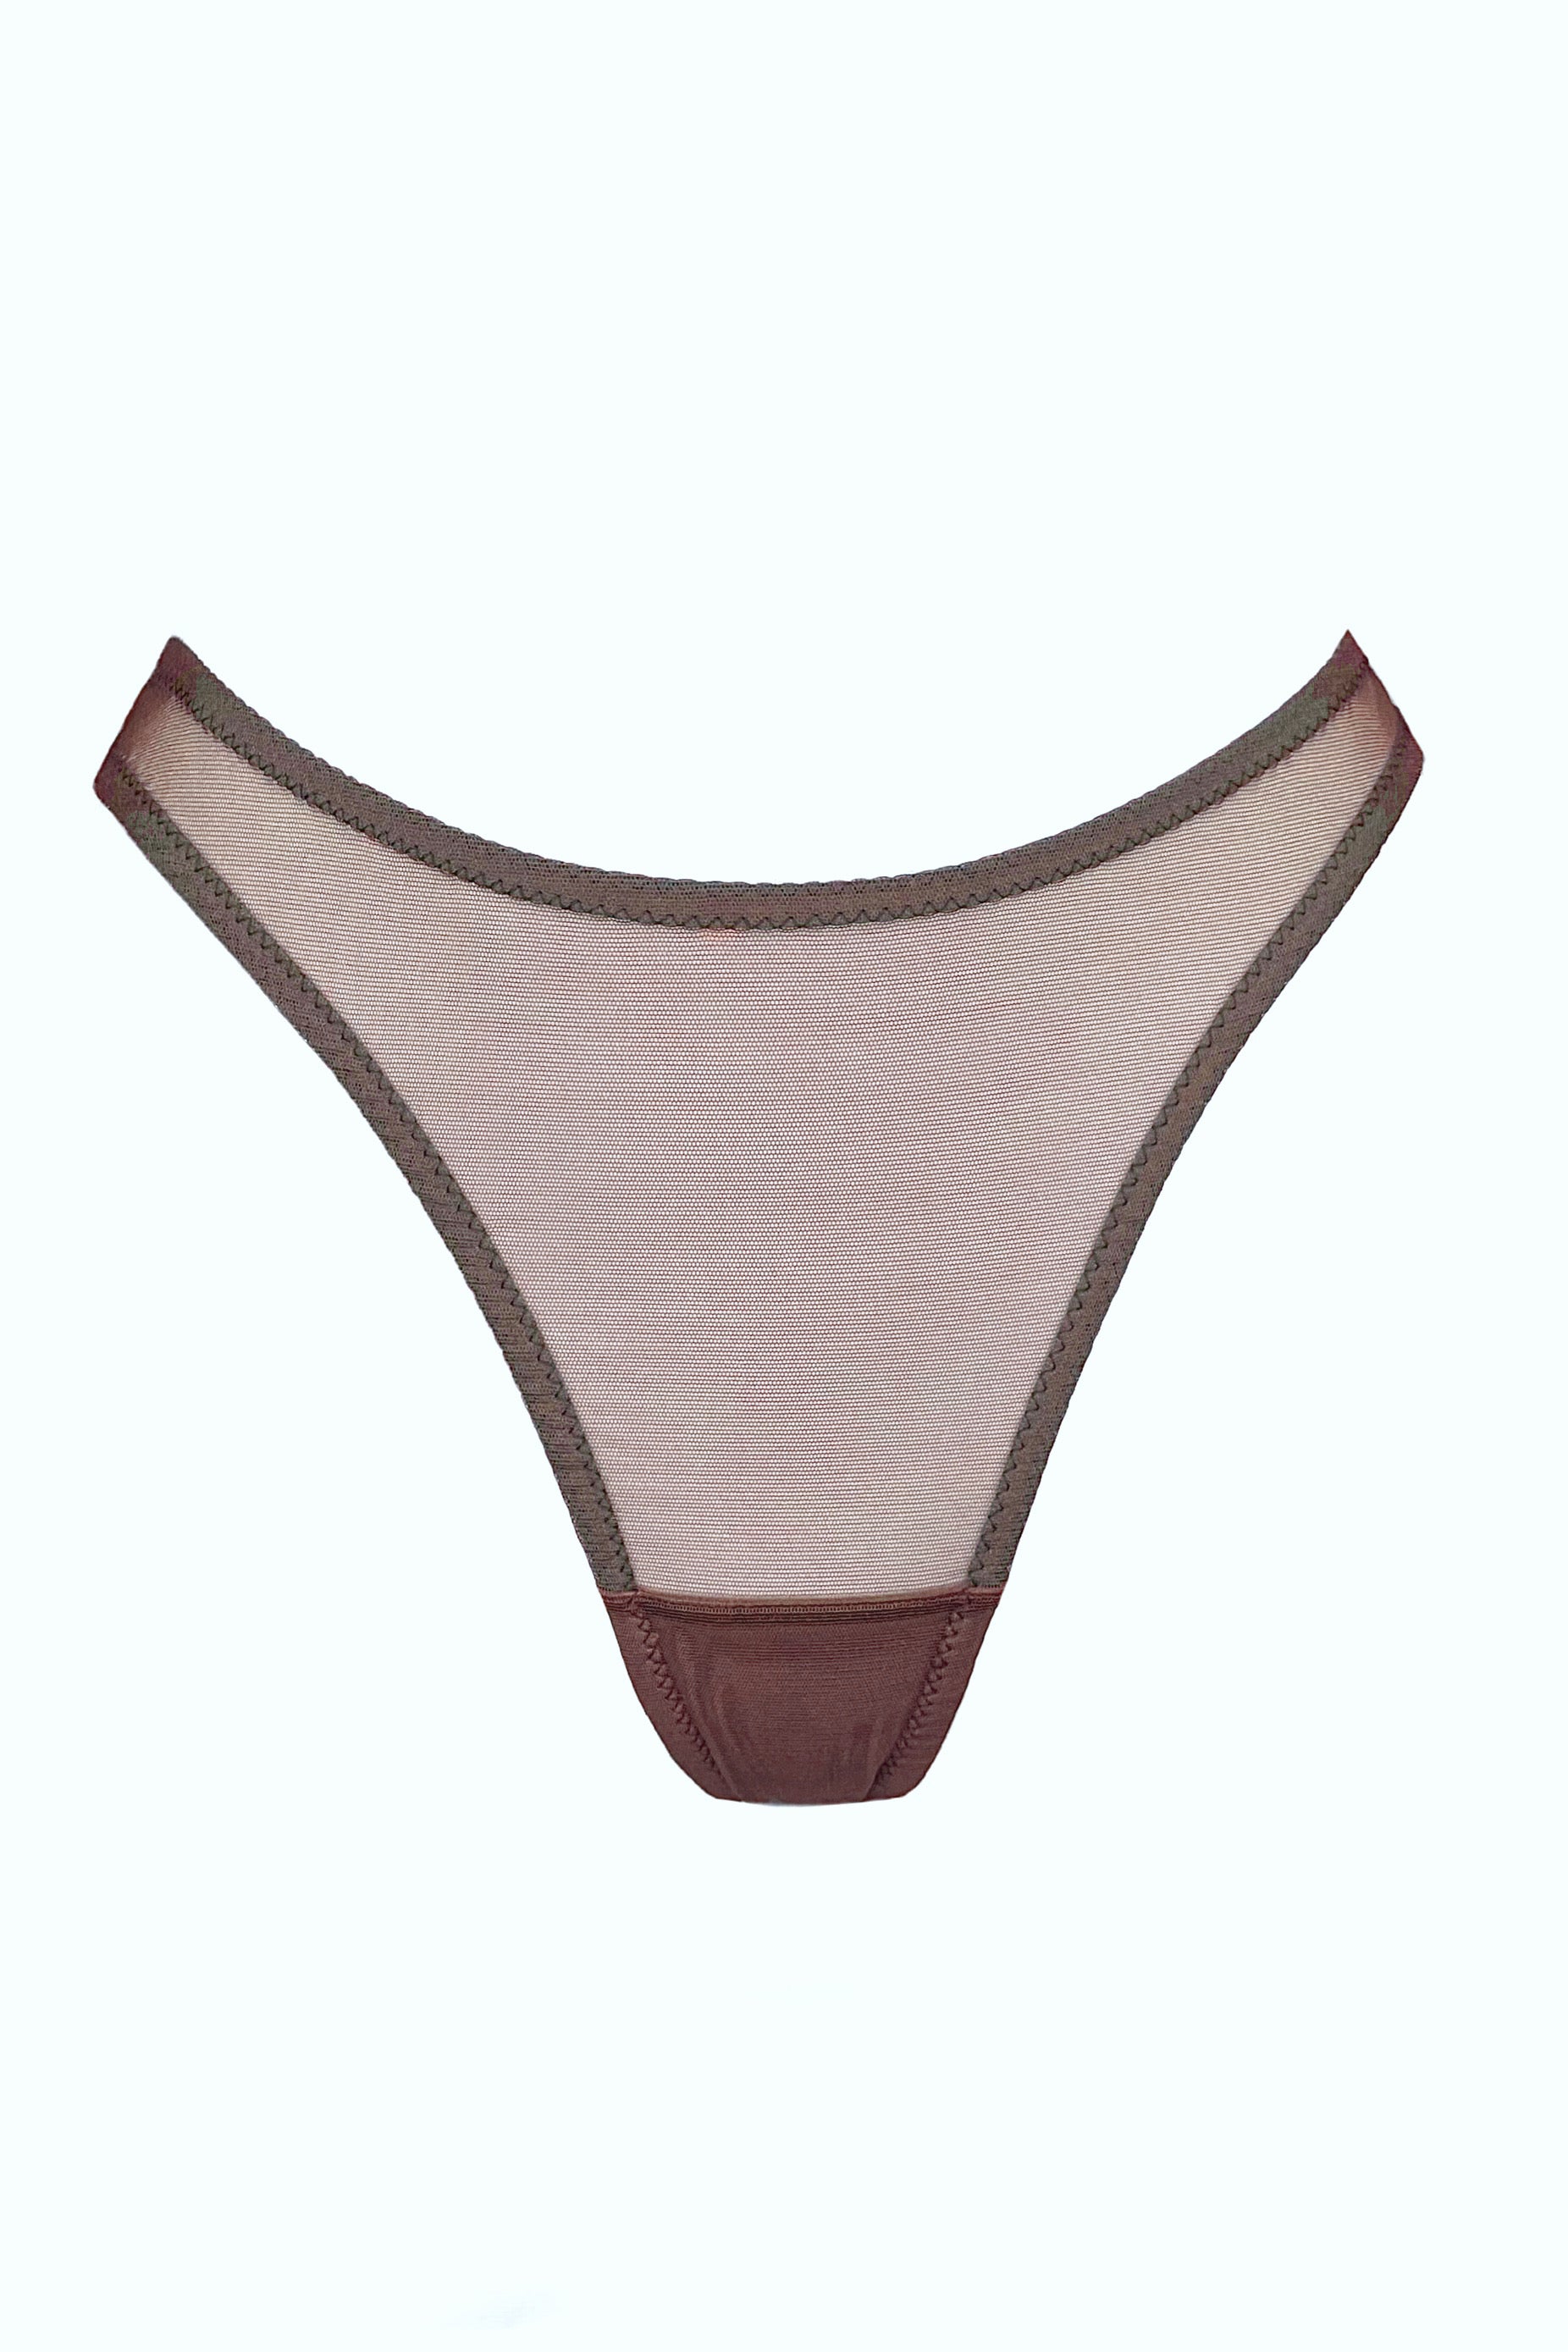 Buy Veluce® Women's Seamles Thong Soft and Stretchable Panty (3